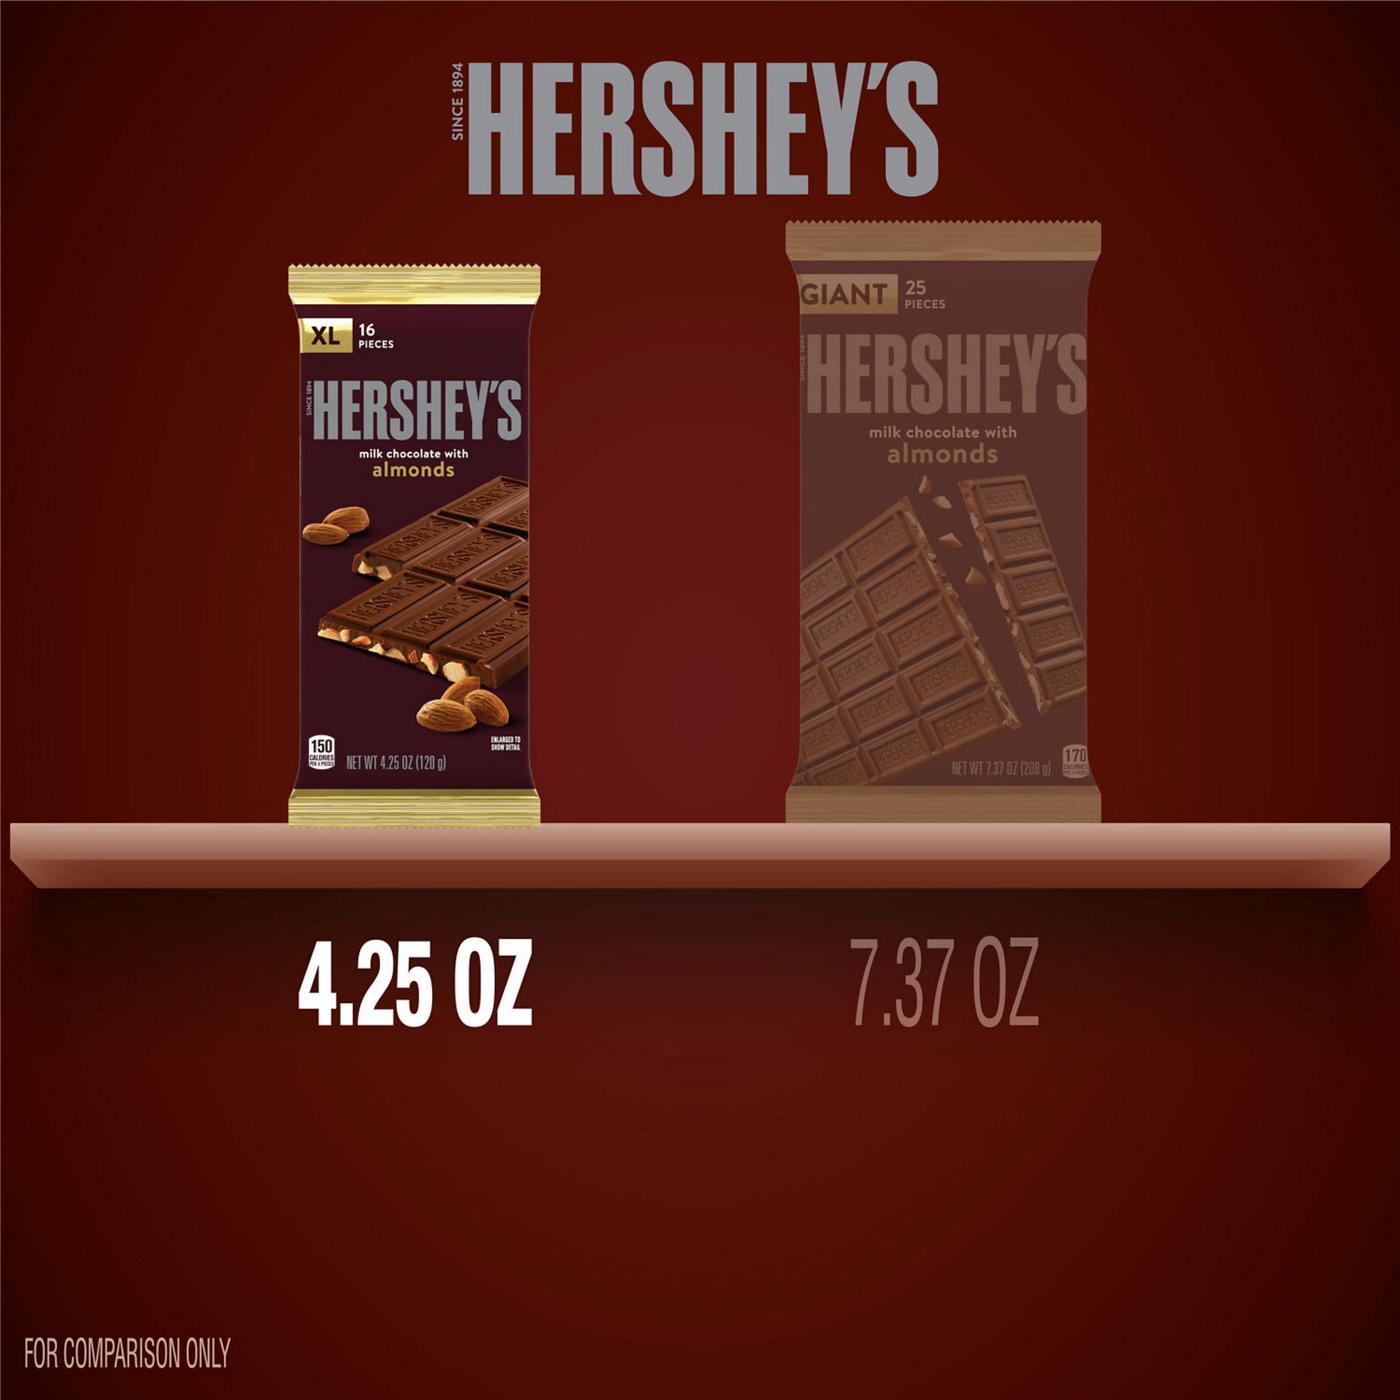 Hershey's Milk Chocolate with Almonds XL Candy Bar; image 7 of 7